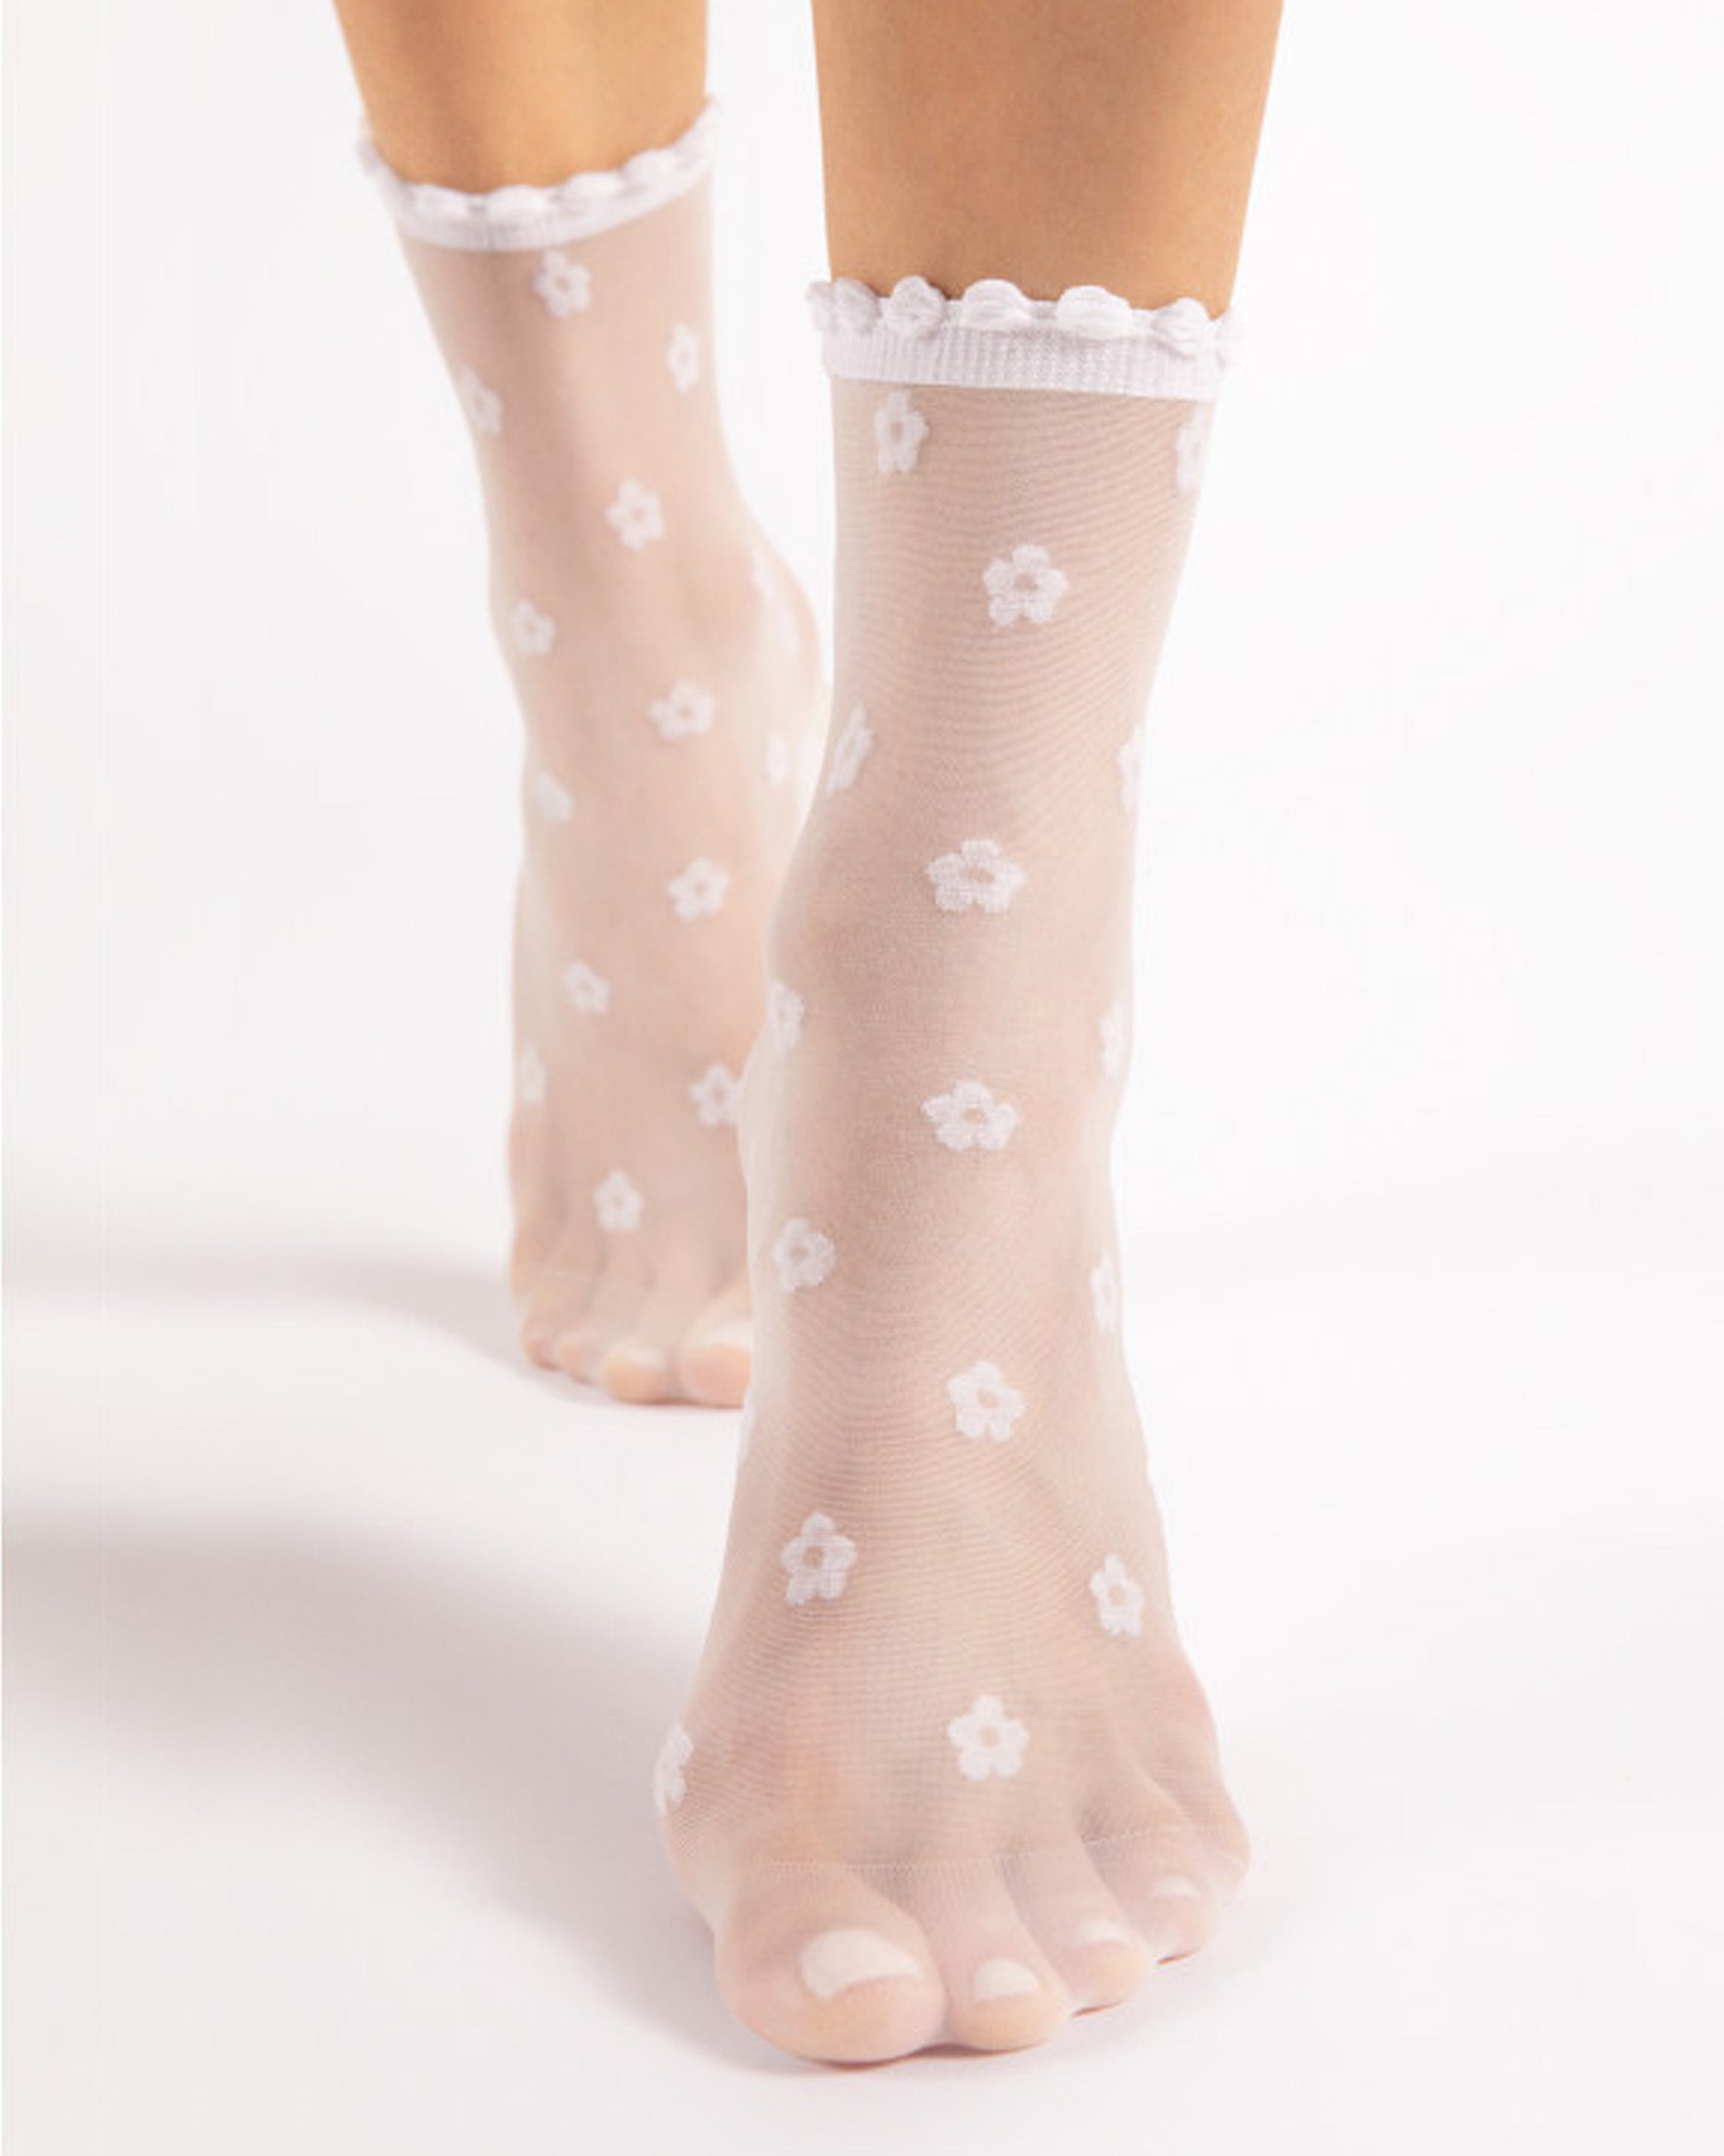 Fiore April Socks - Sheer white fashion ankle socks with an all over daisy plower pattern, frilly scalloped cuff and sheer reinforced toe.